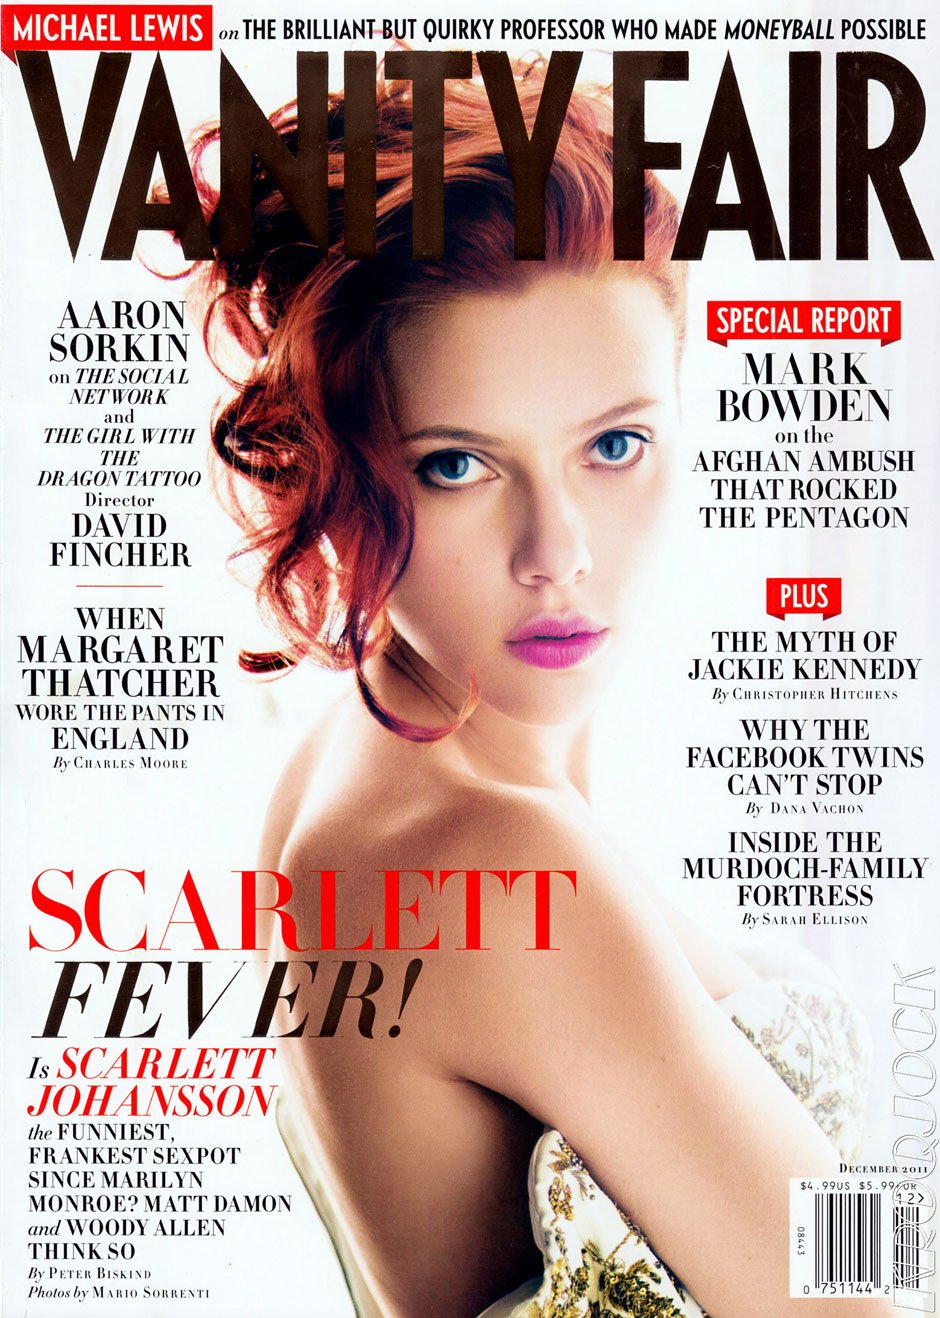 how to become a writer for vanity fair